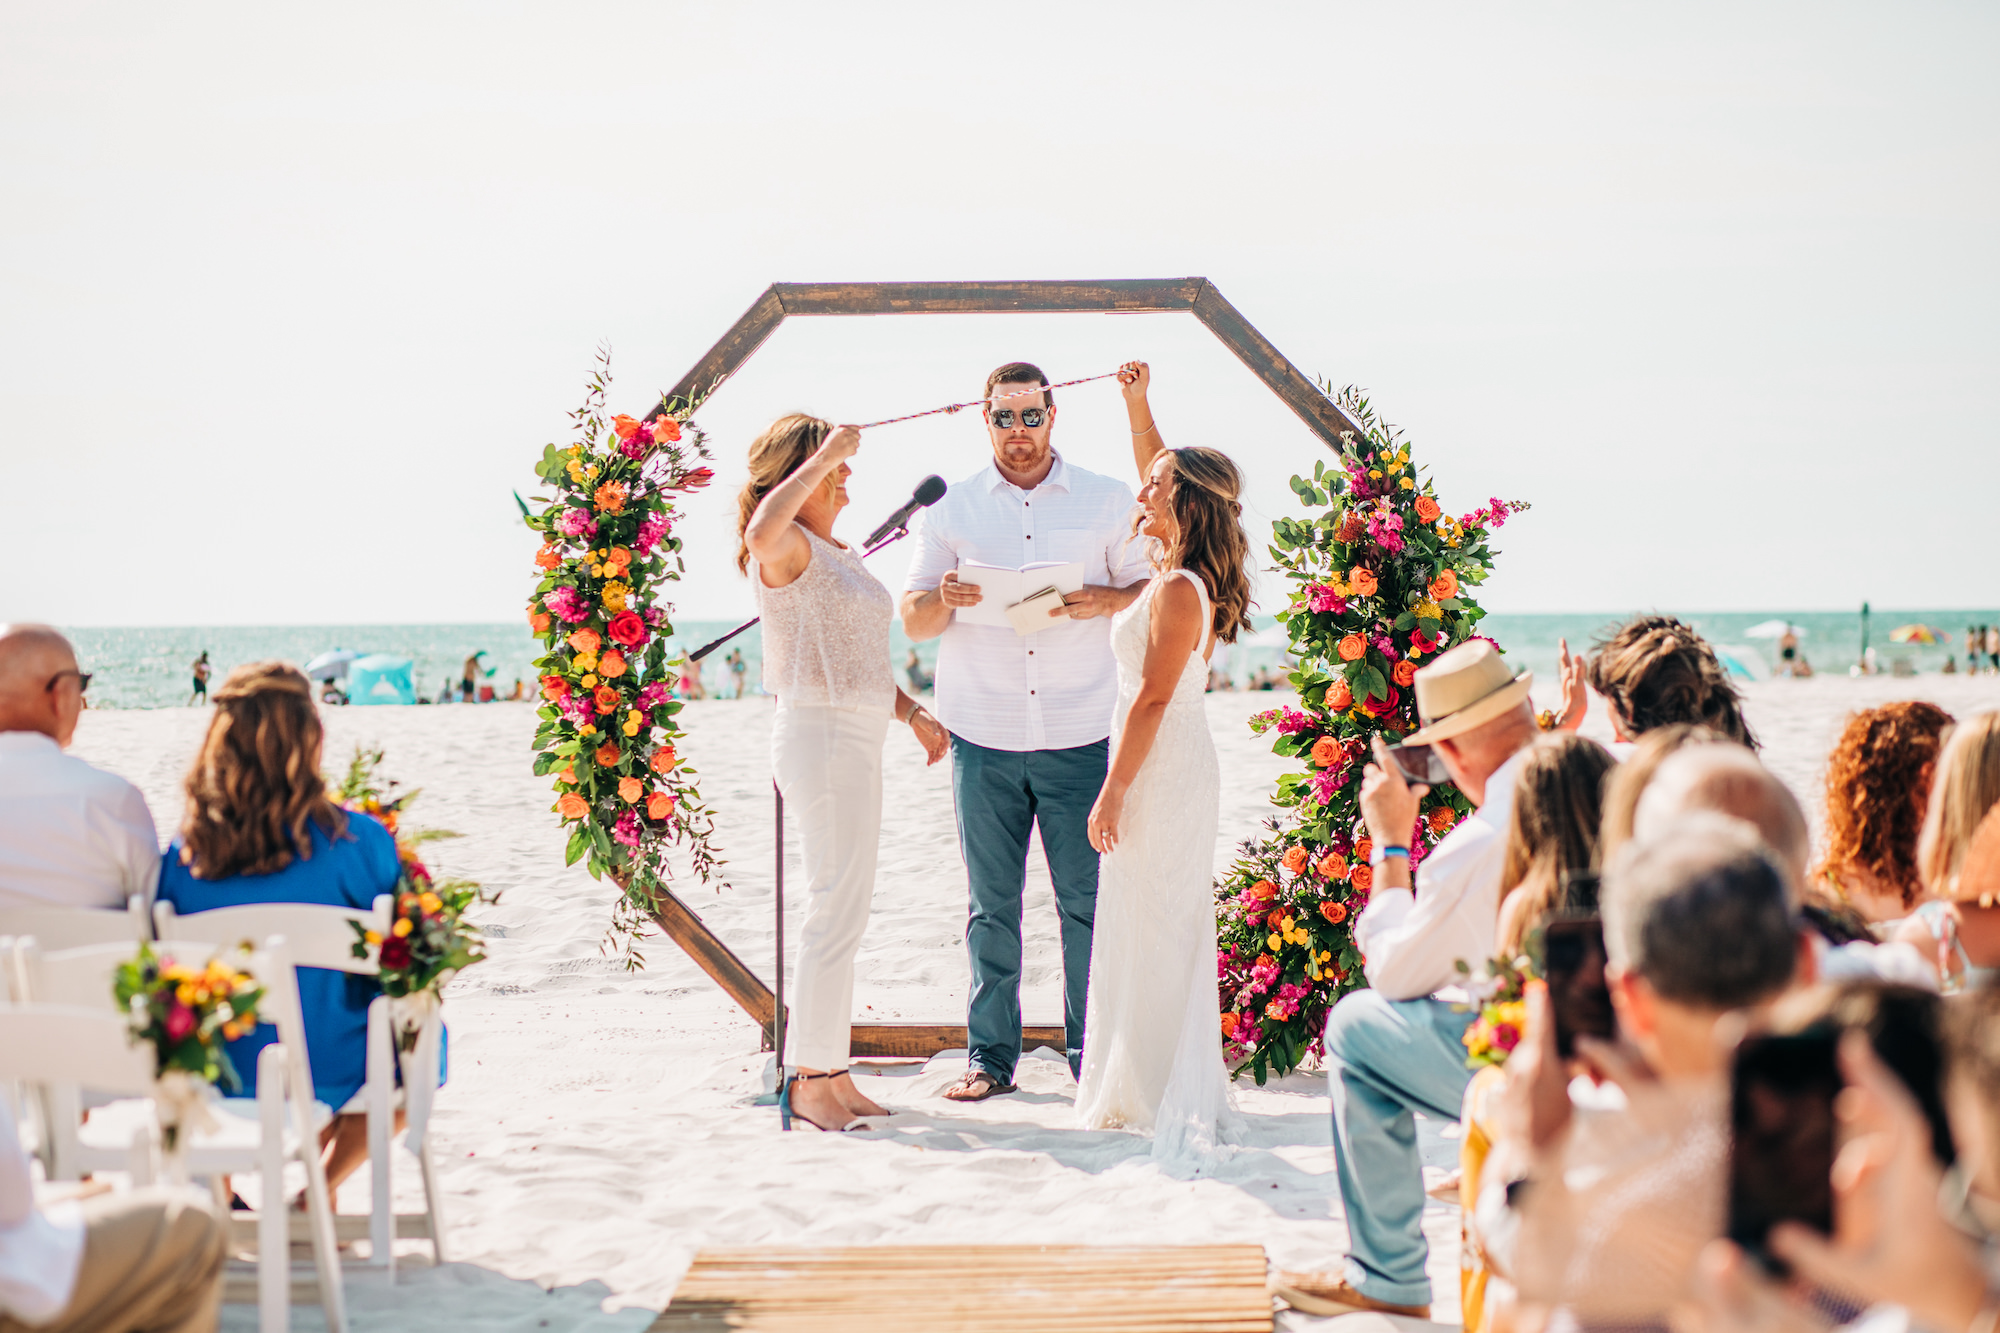 Vibrant Colorful Same Sex Wedding Ceremony, Brides Doing Unity Ceremony, Geometric Wooden Arch with Lush Yellow, Pink, Orange and Greenery Floral Arrangements | Waterfront Wedding Venue Hilton Clearwater Beach